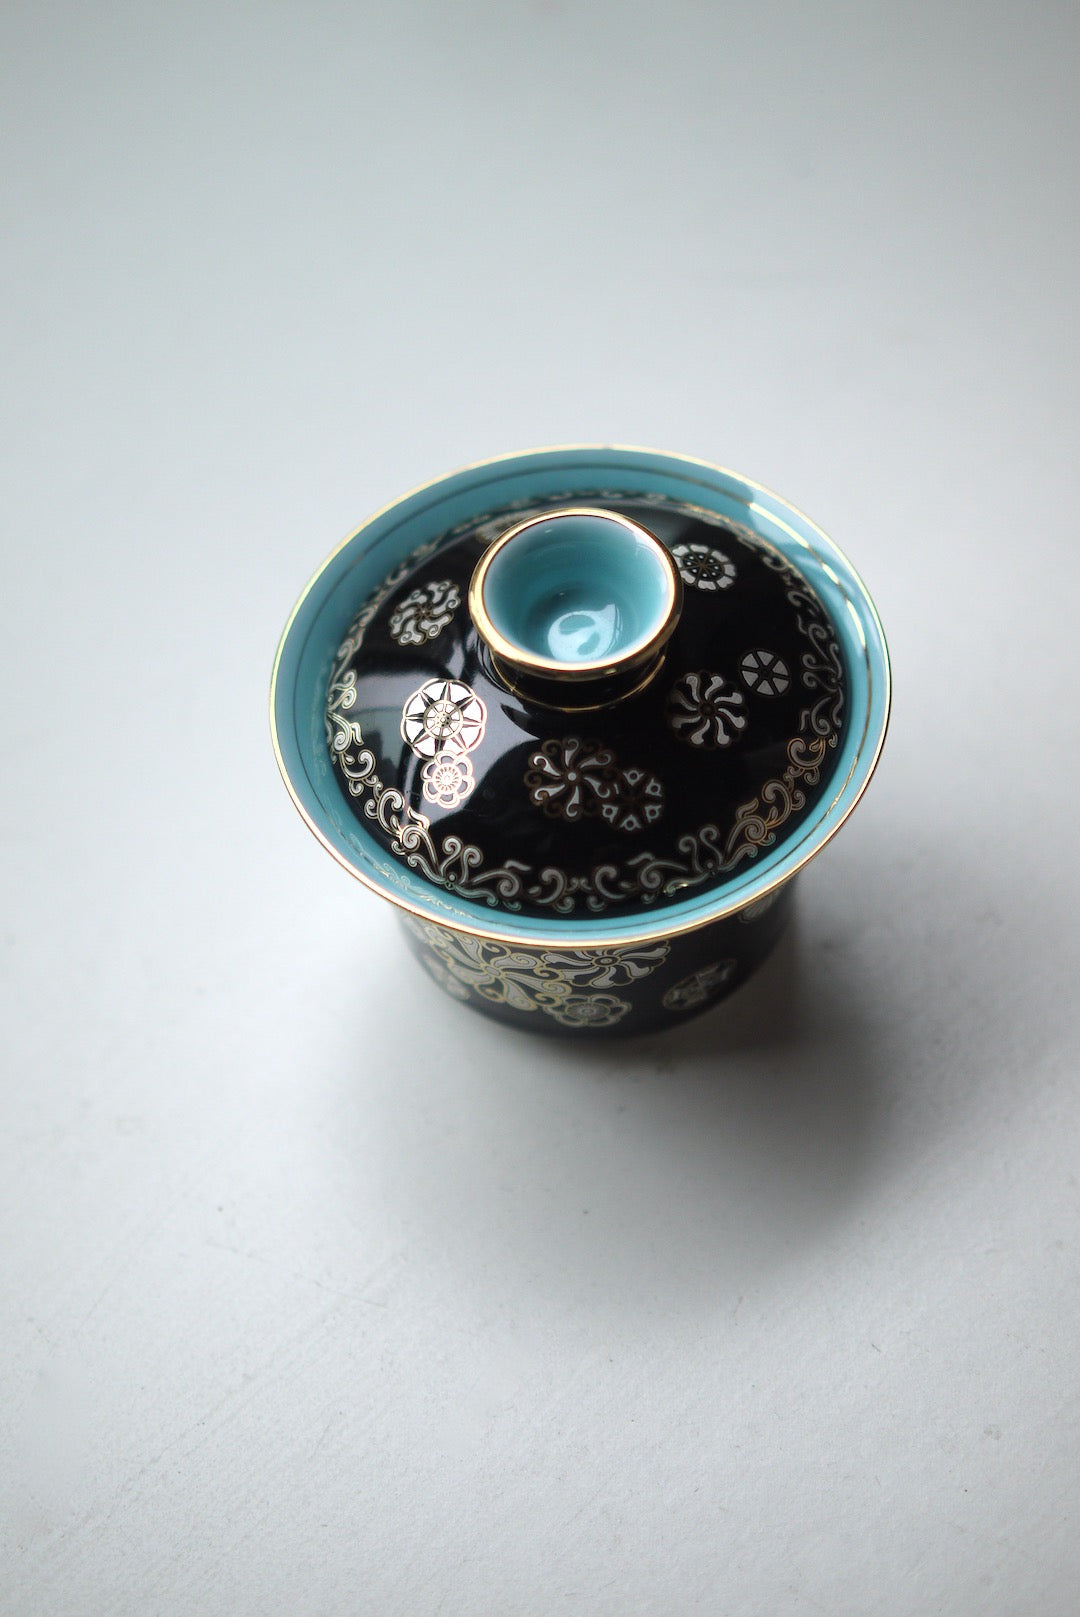 Black Porcelain Gaiwan With Gold Silver Traditional Chines Patterns|Best Ceraimcs